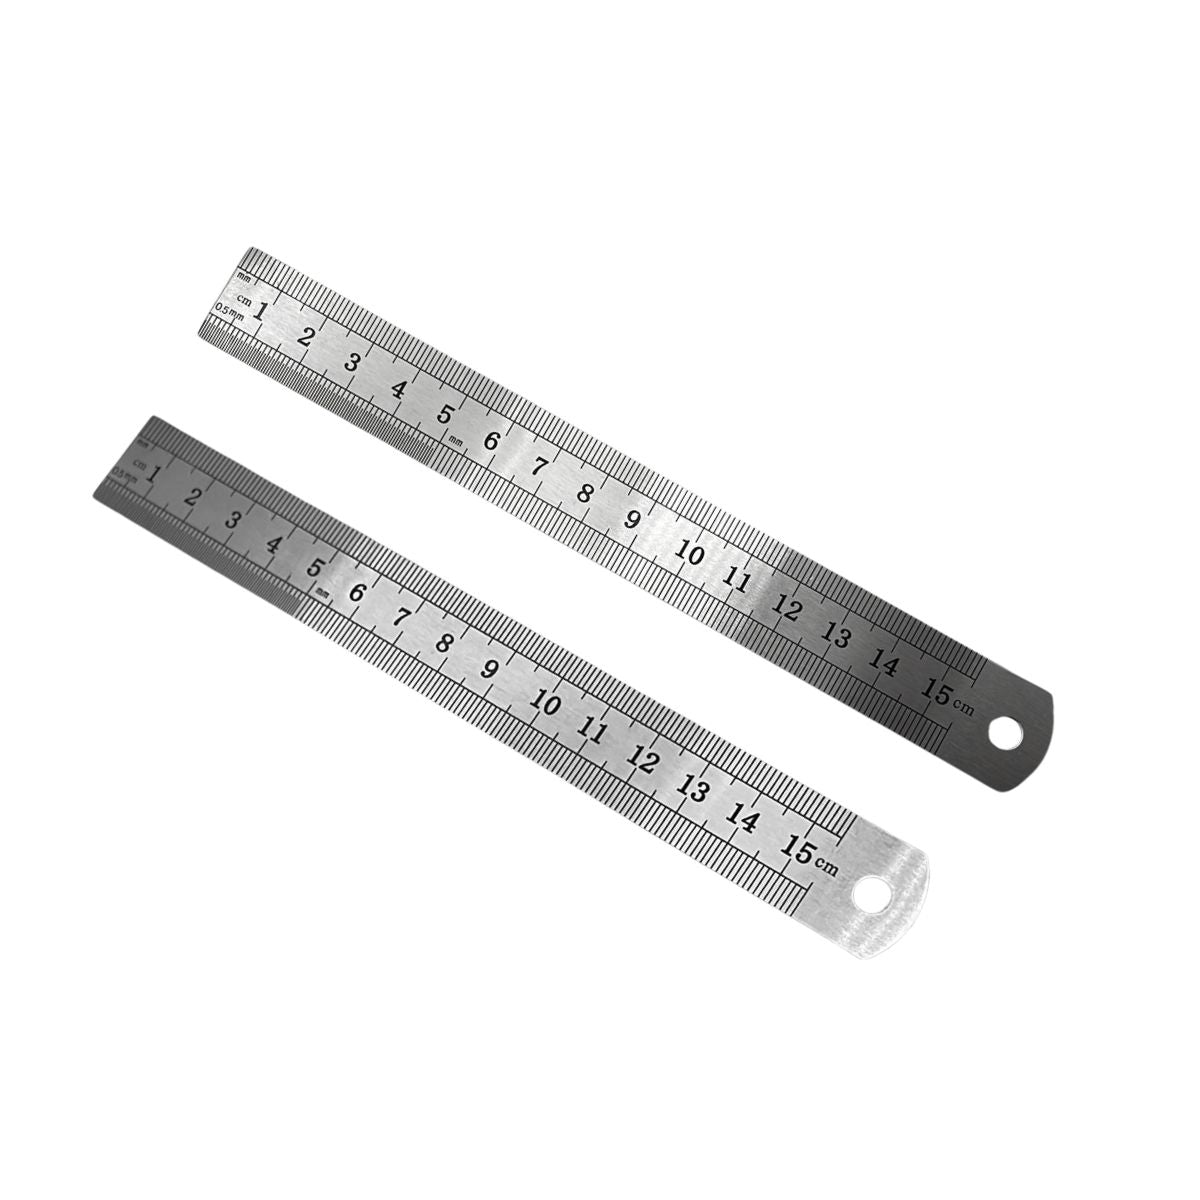 15cm Stainless Steel metal ruler - South East Clearance Centre